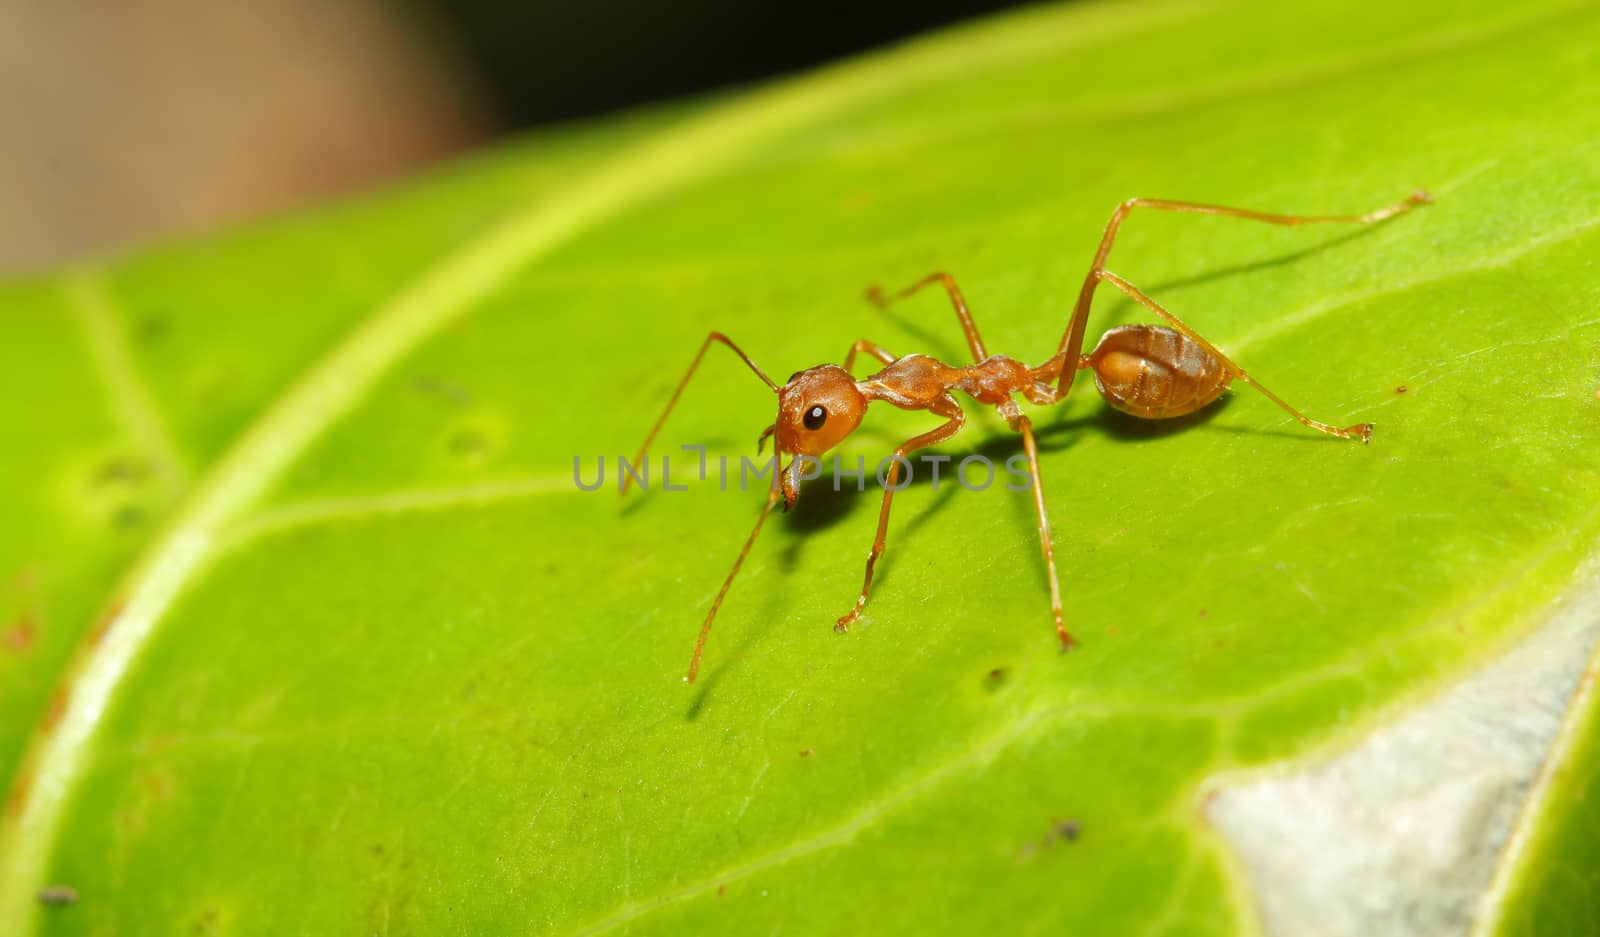 Red ant on leaf by pumppump